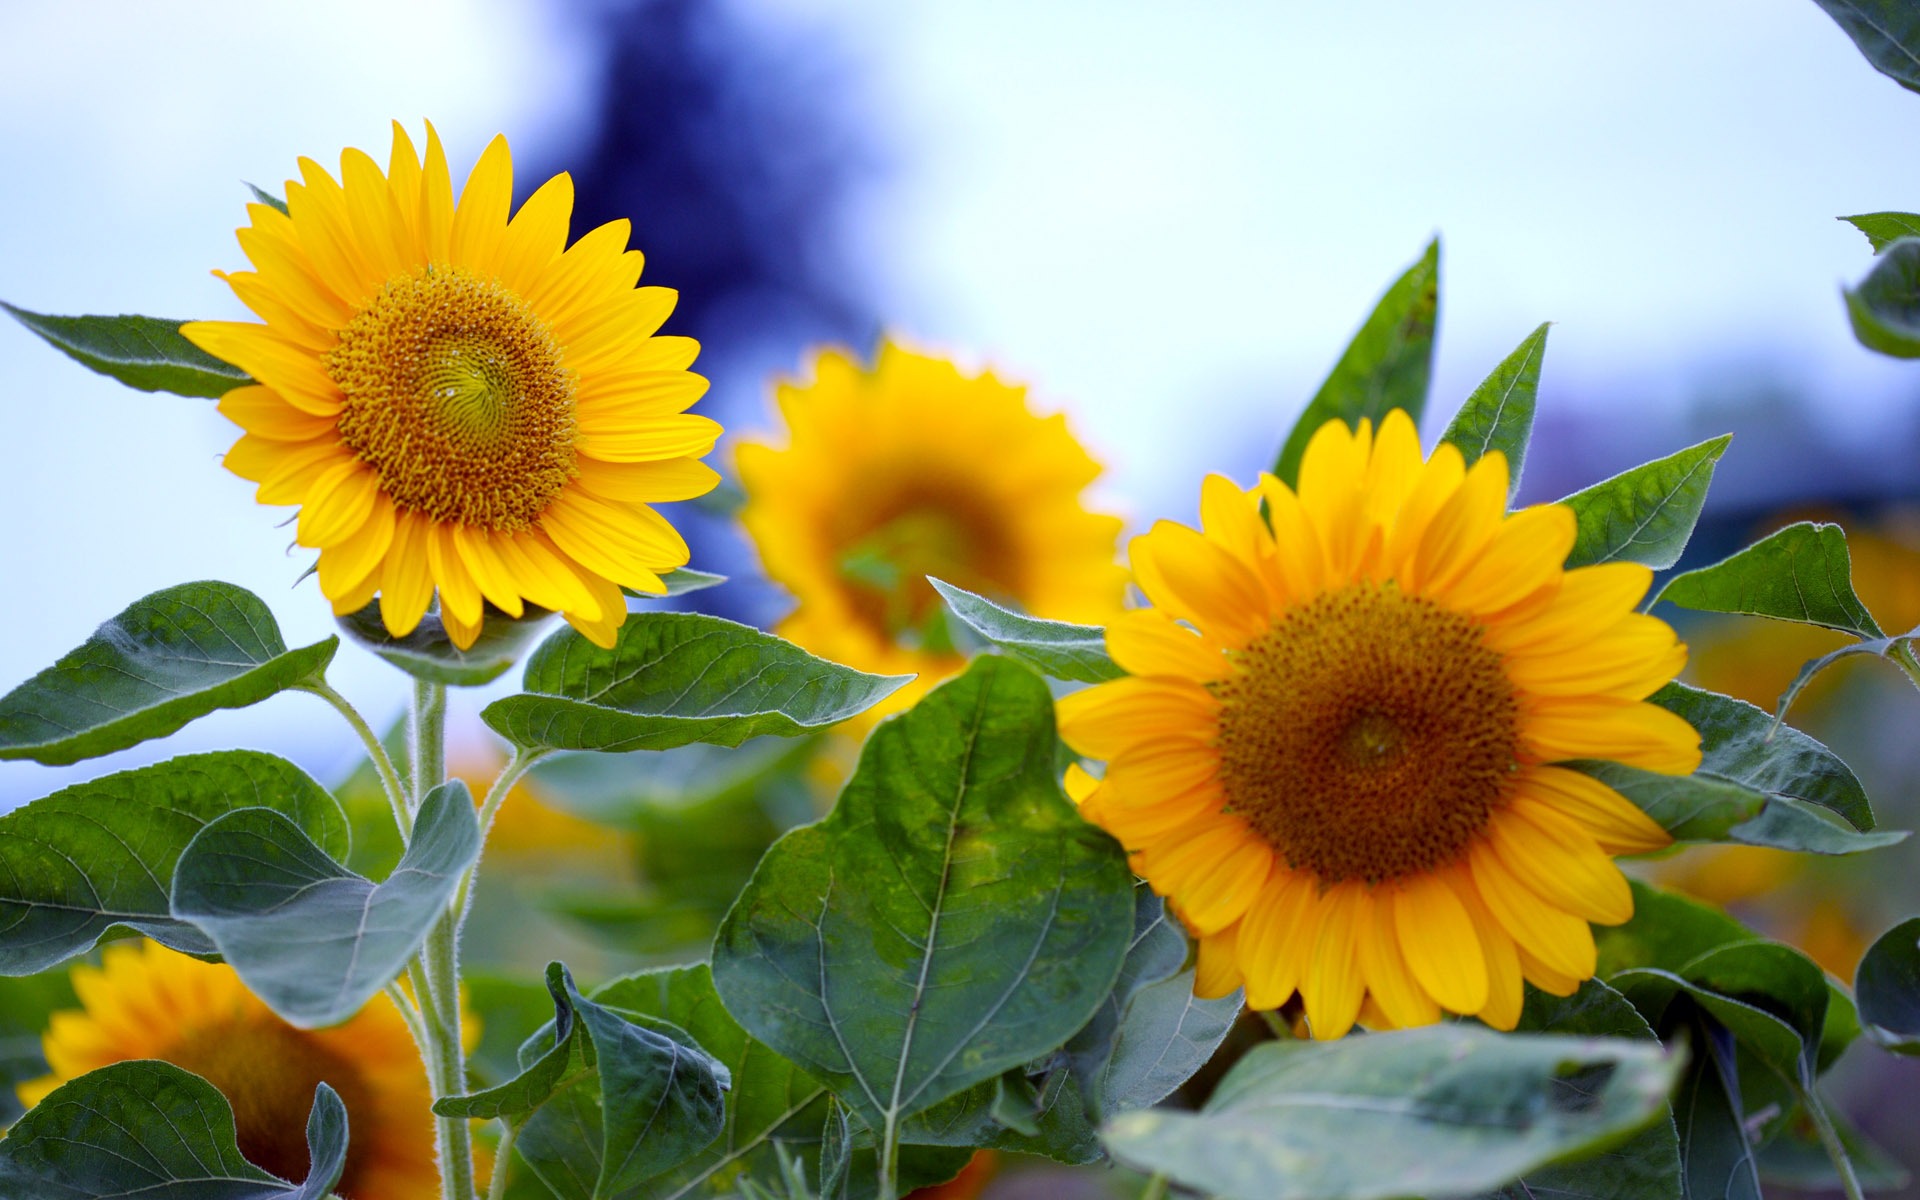 Sunny sunflower photo HD Wallpapers #23 - 1920x1200